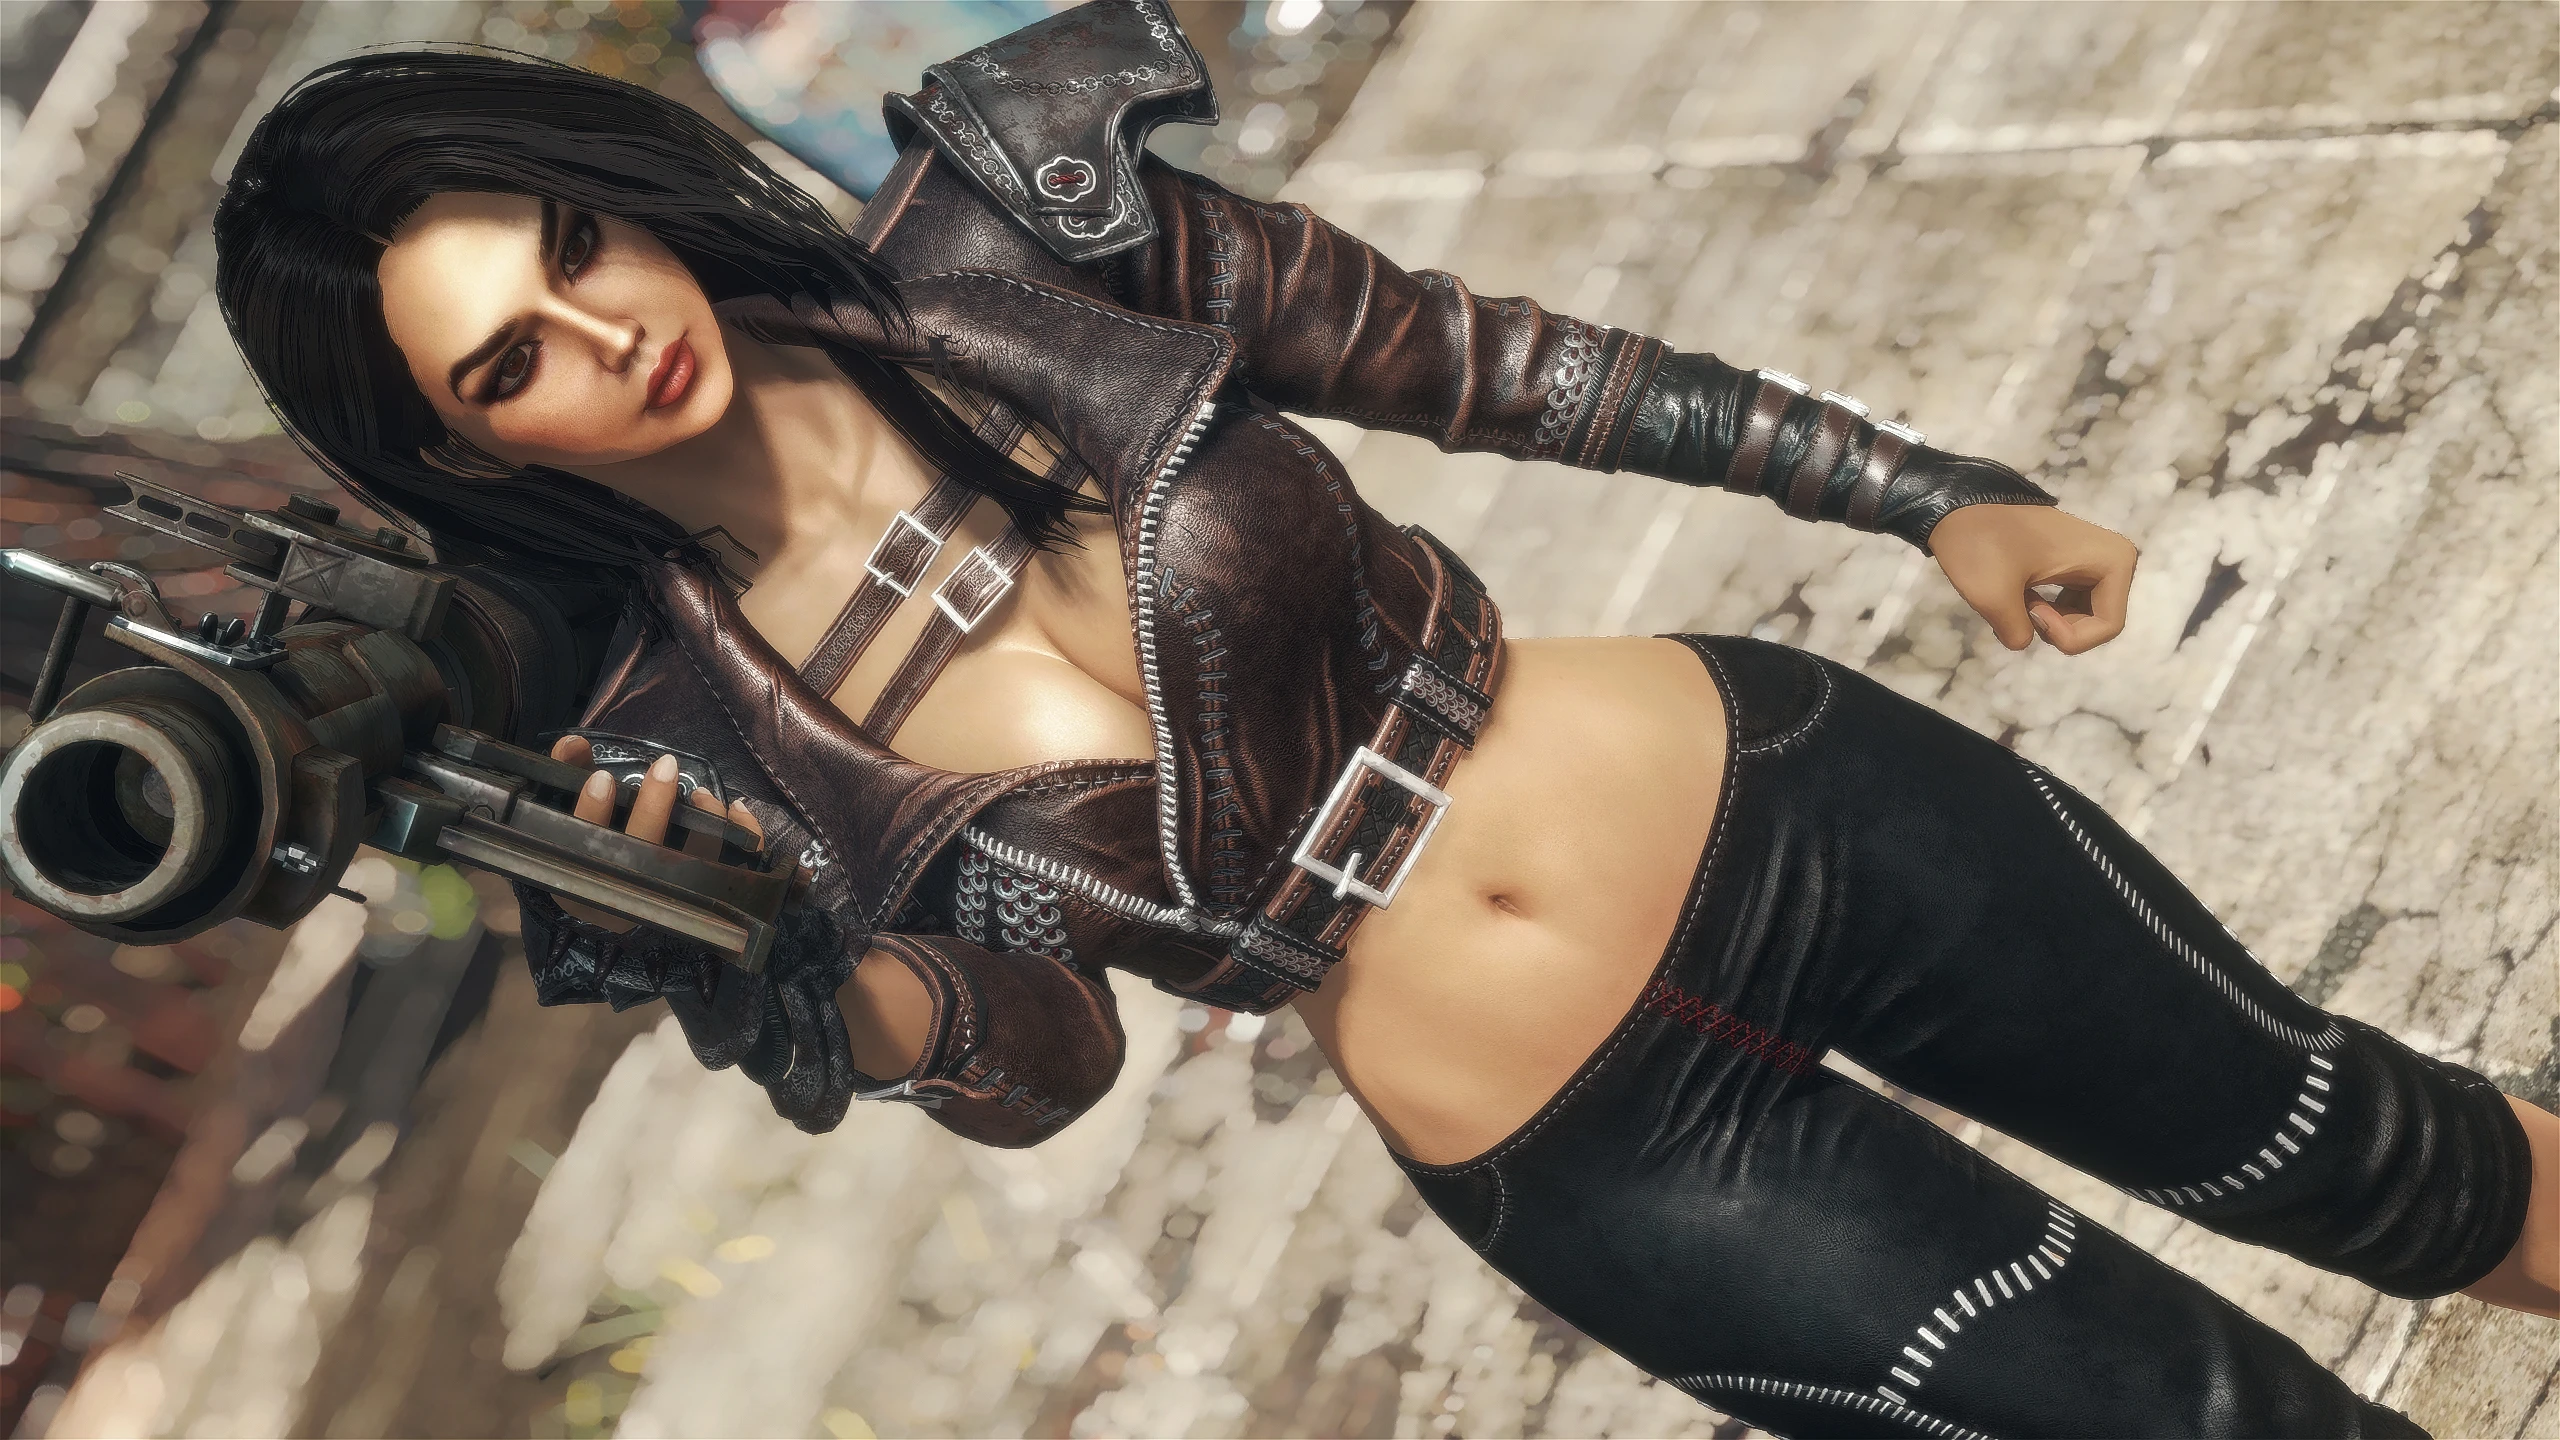 Vtaw workshop fallout 4 clothing armor mods фото 96